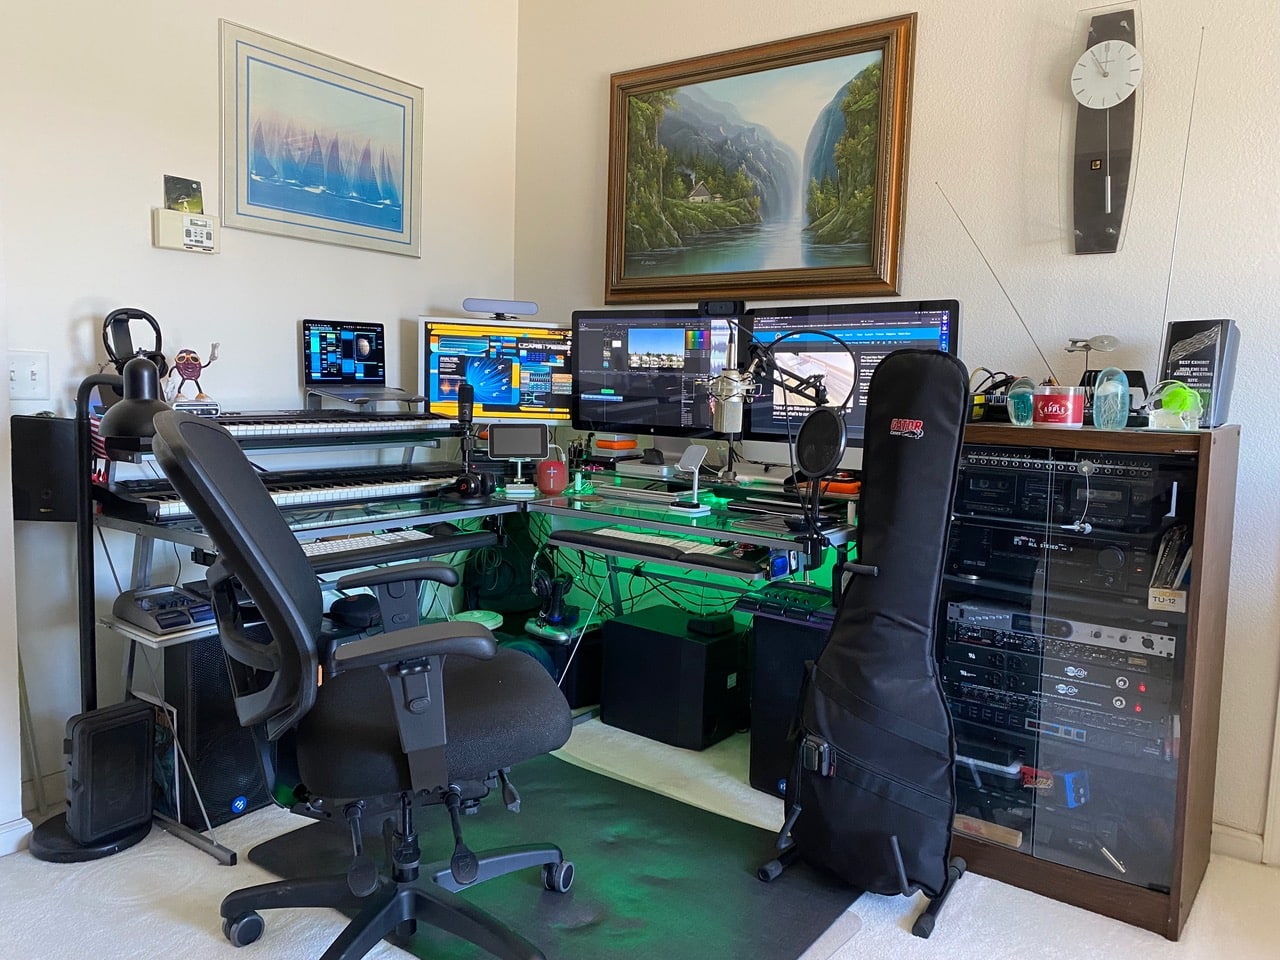 Thad K's setup features 69 different pieces of gear.